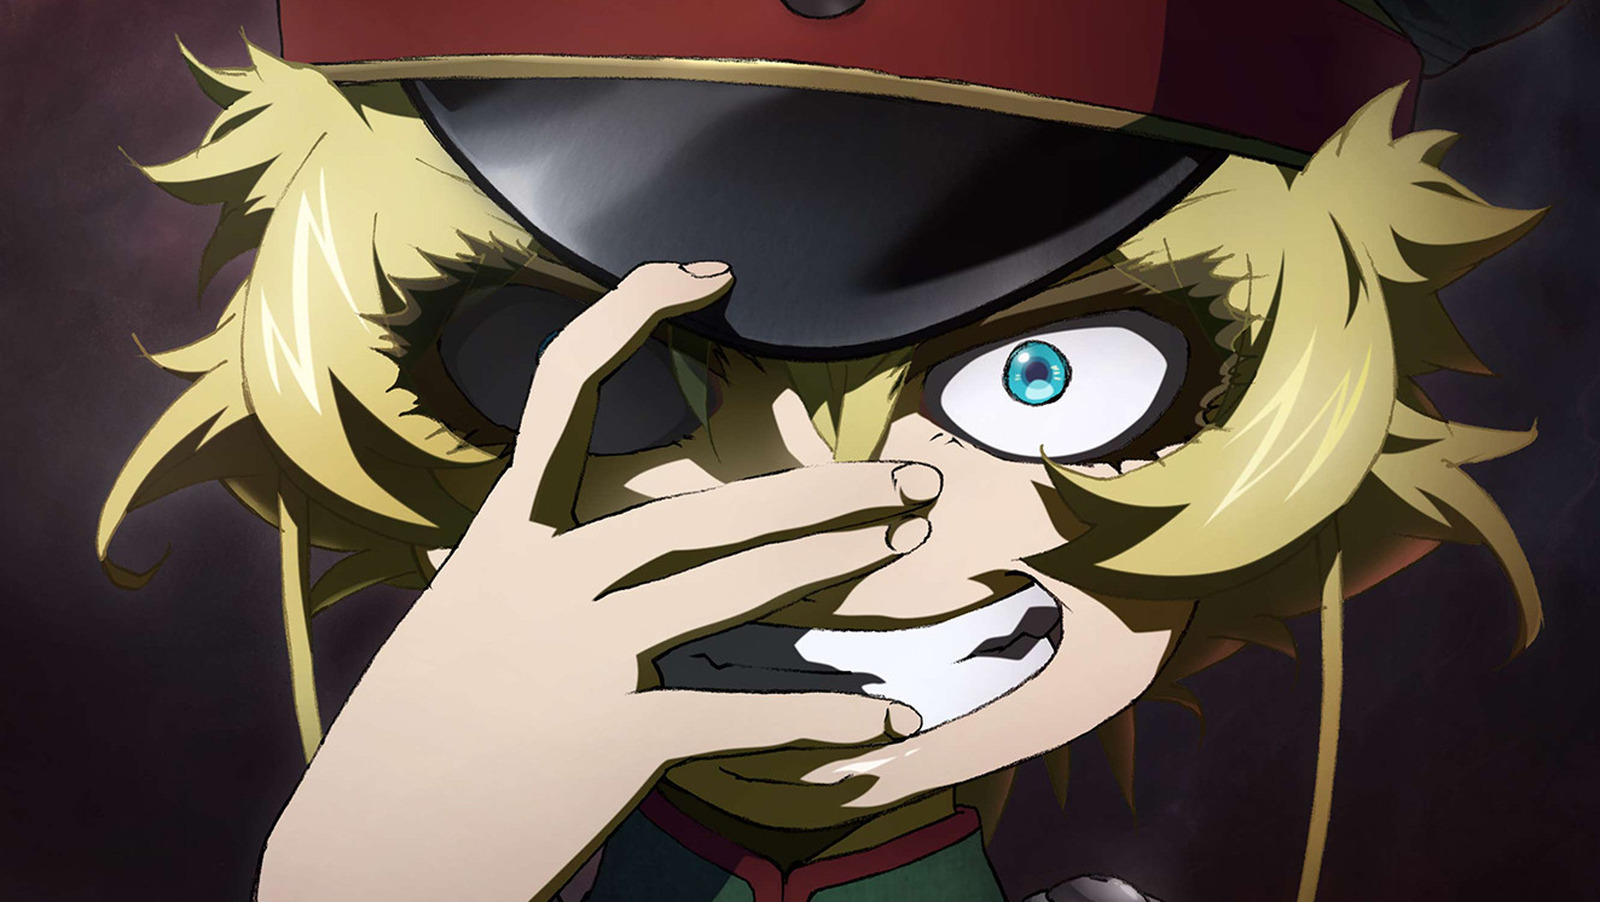 Is Tanya von Degurechaff from the anime/manga series “The Saga of Tanya the  Evil” supposed to be a Nazi? - Quora